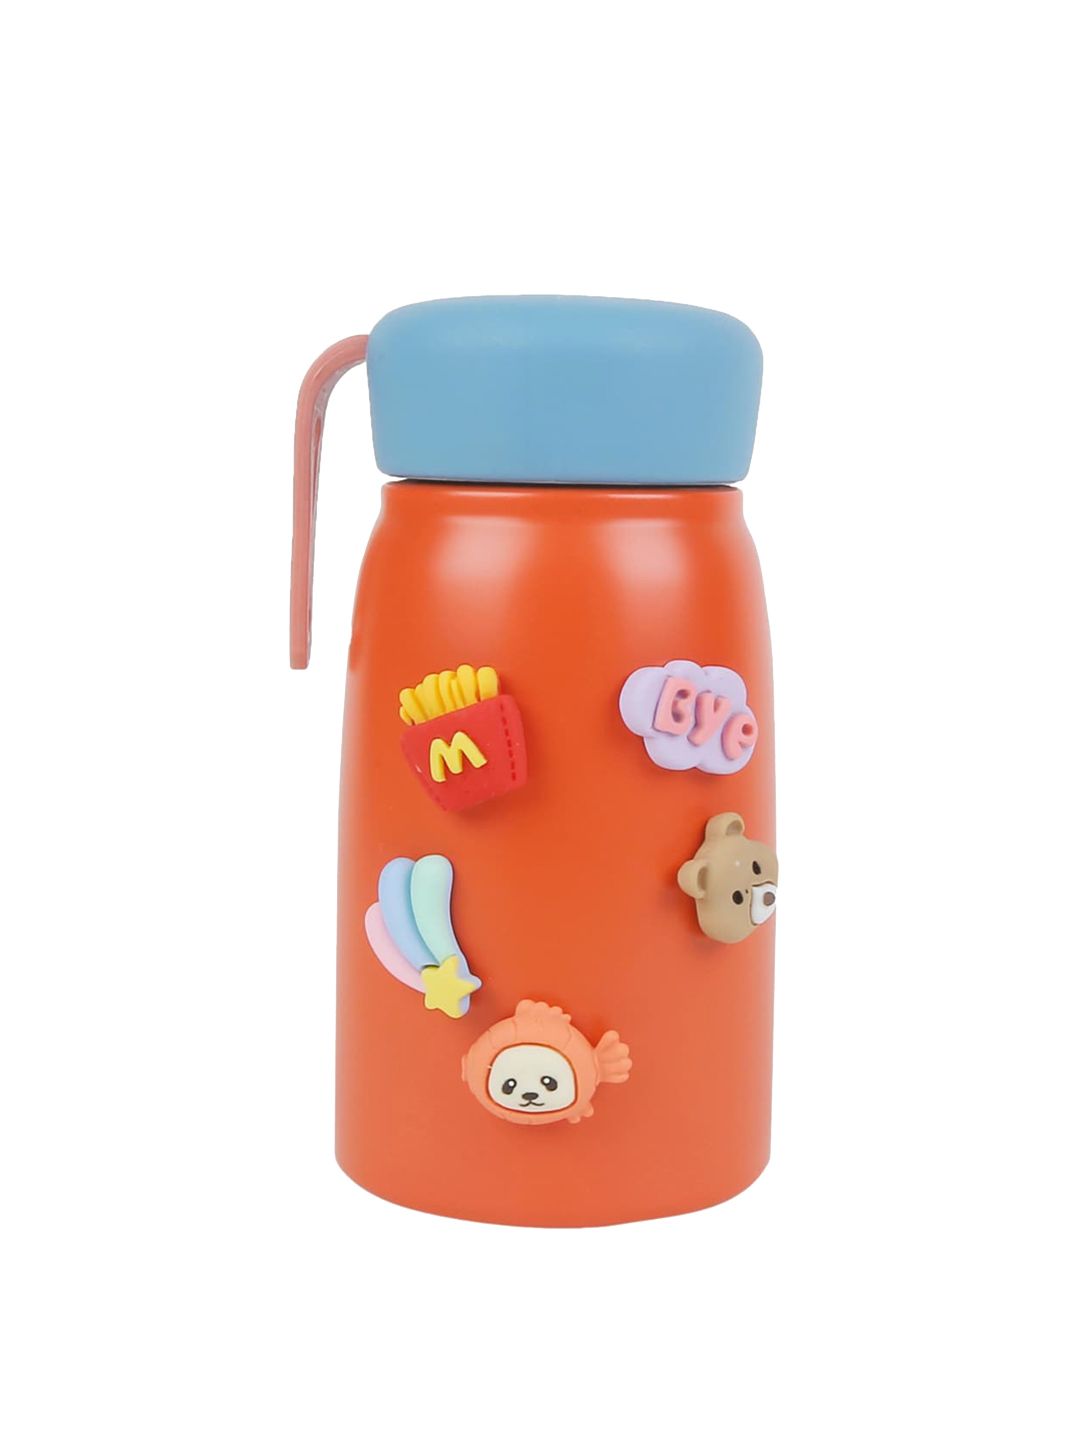 iSWEVEN Orange & Blue Stainless Steel Double Wall Vacuum Insulated Water Bottle Price in India